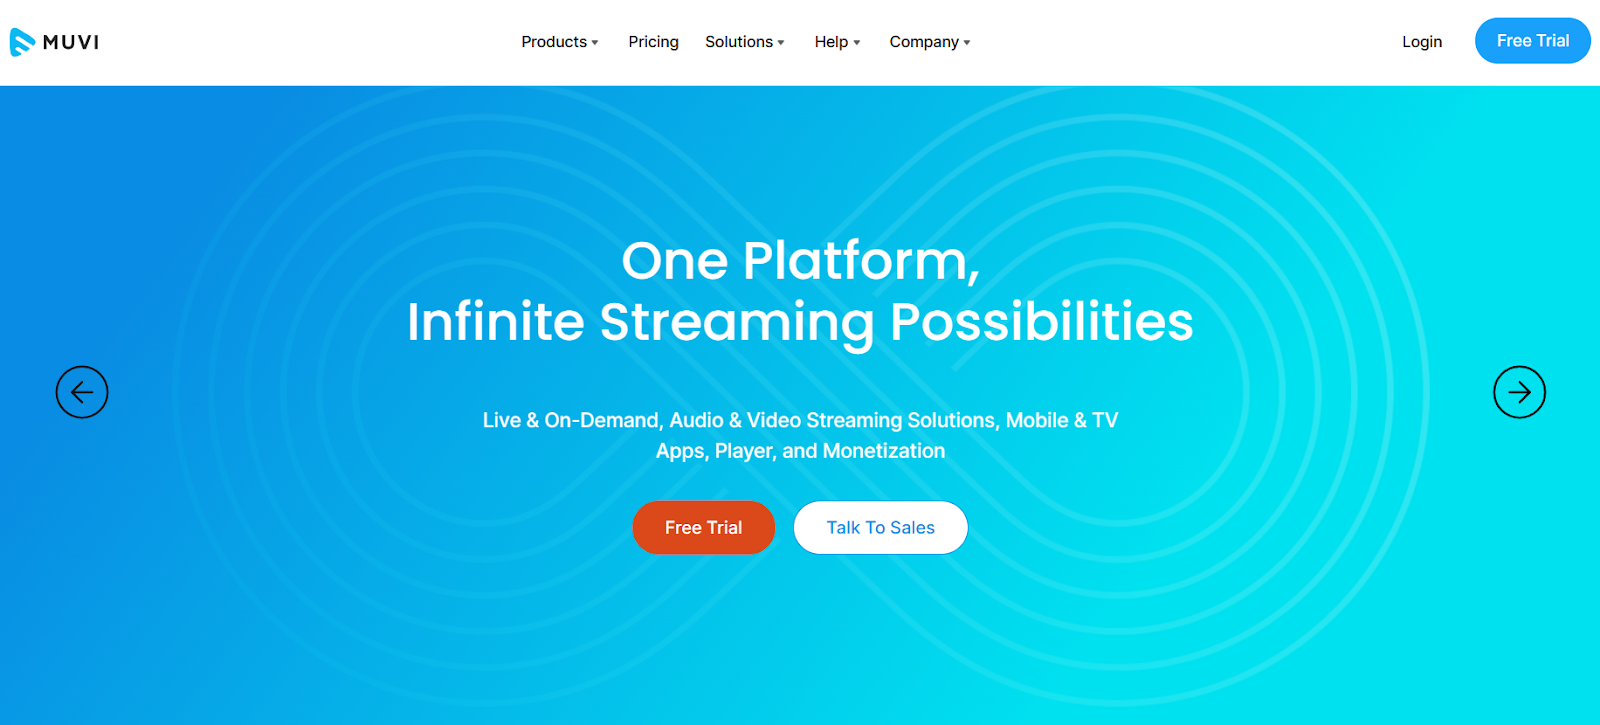 muvi ott and live tv streaming services